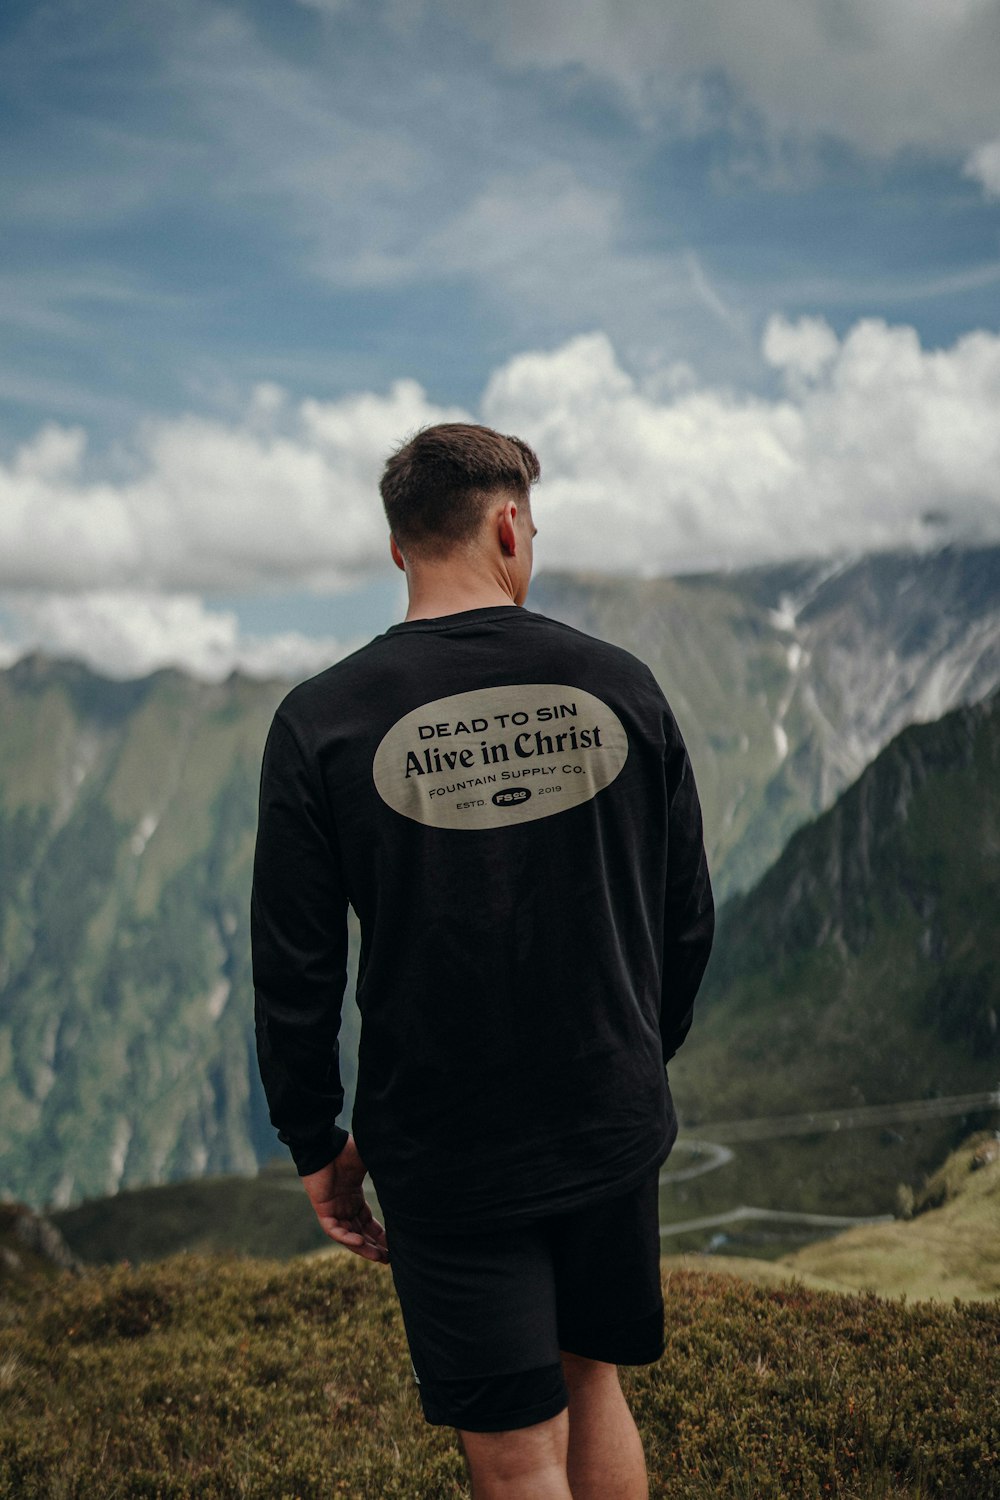 man in black and white long sleeve shirt standing on mountain under blue and white cloudy